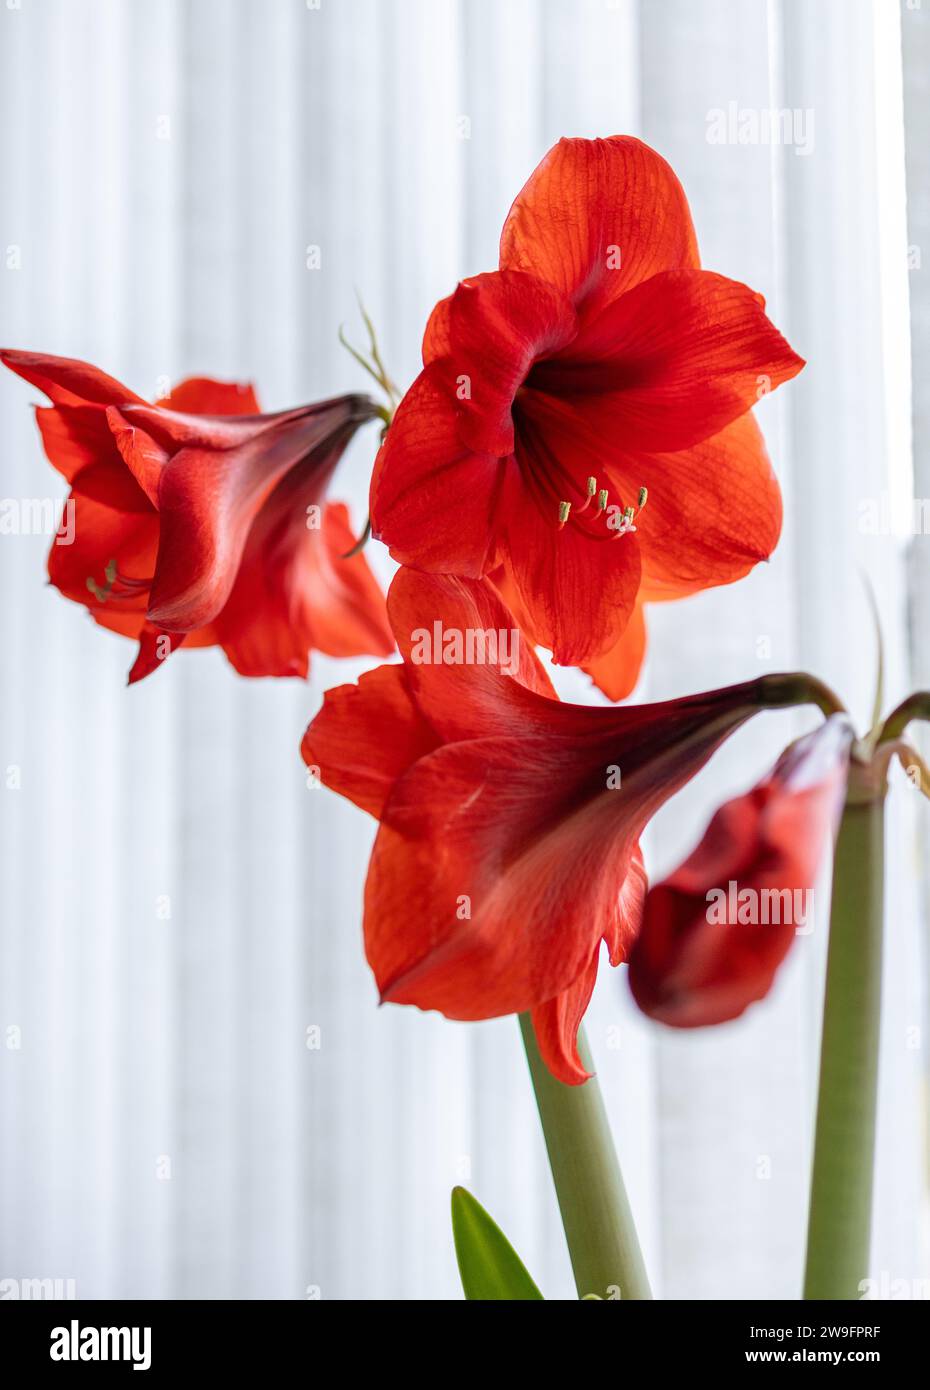 Abstract view of a red amaryllis plant flower in bloom with defocused white vertical blinds background Stock Photo